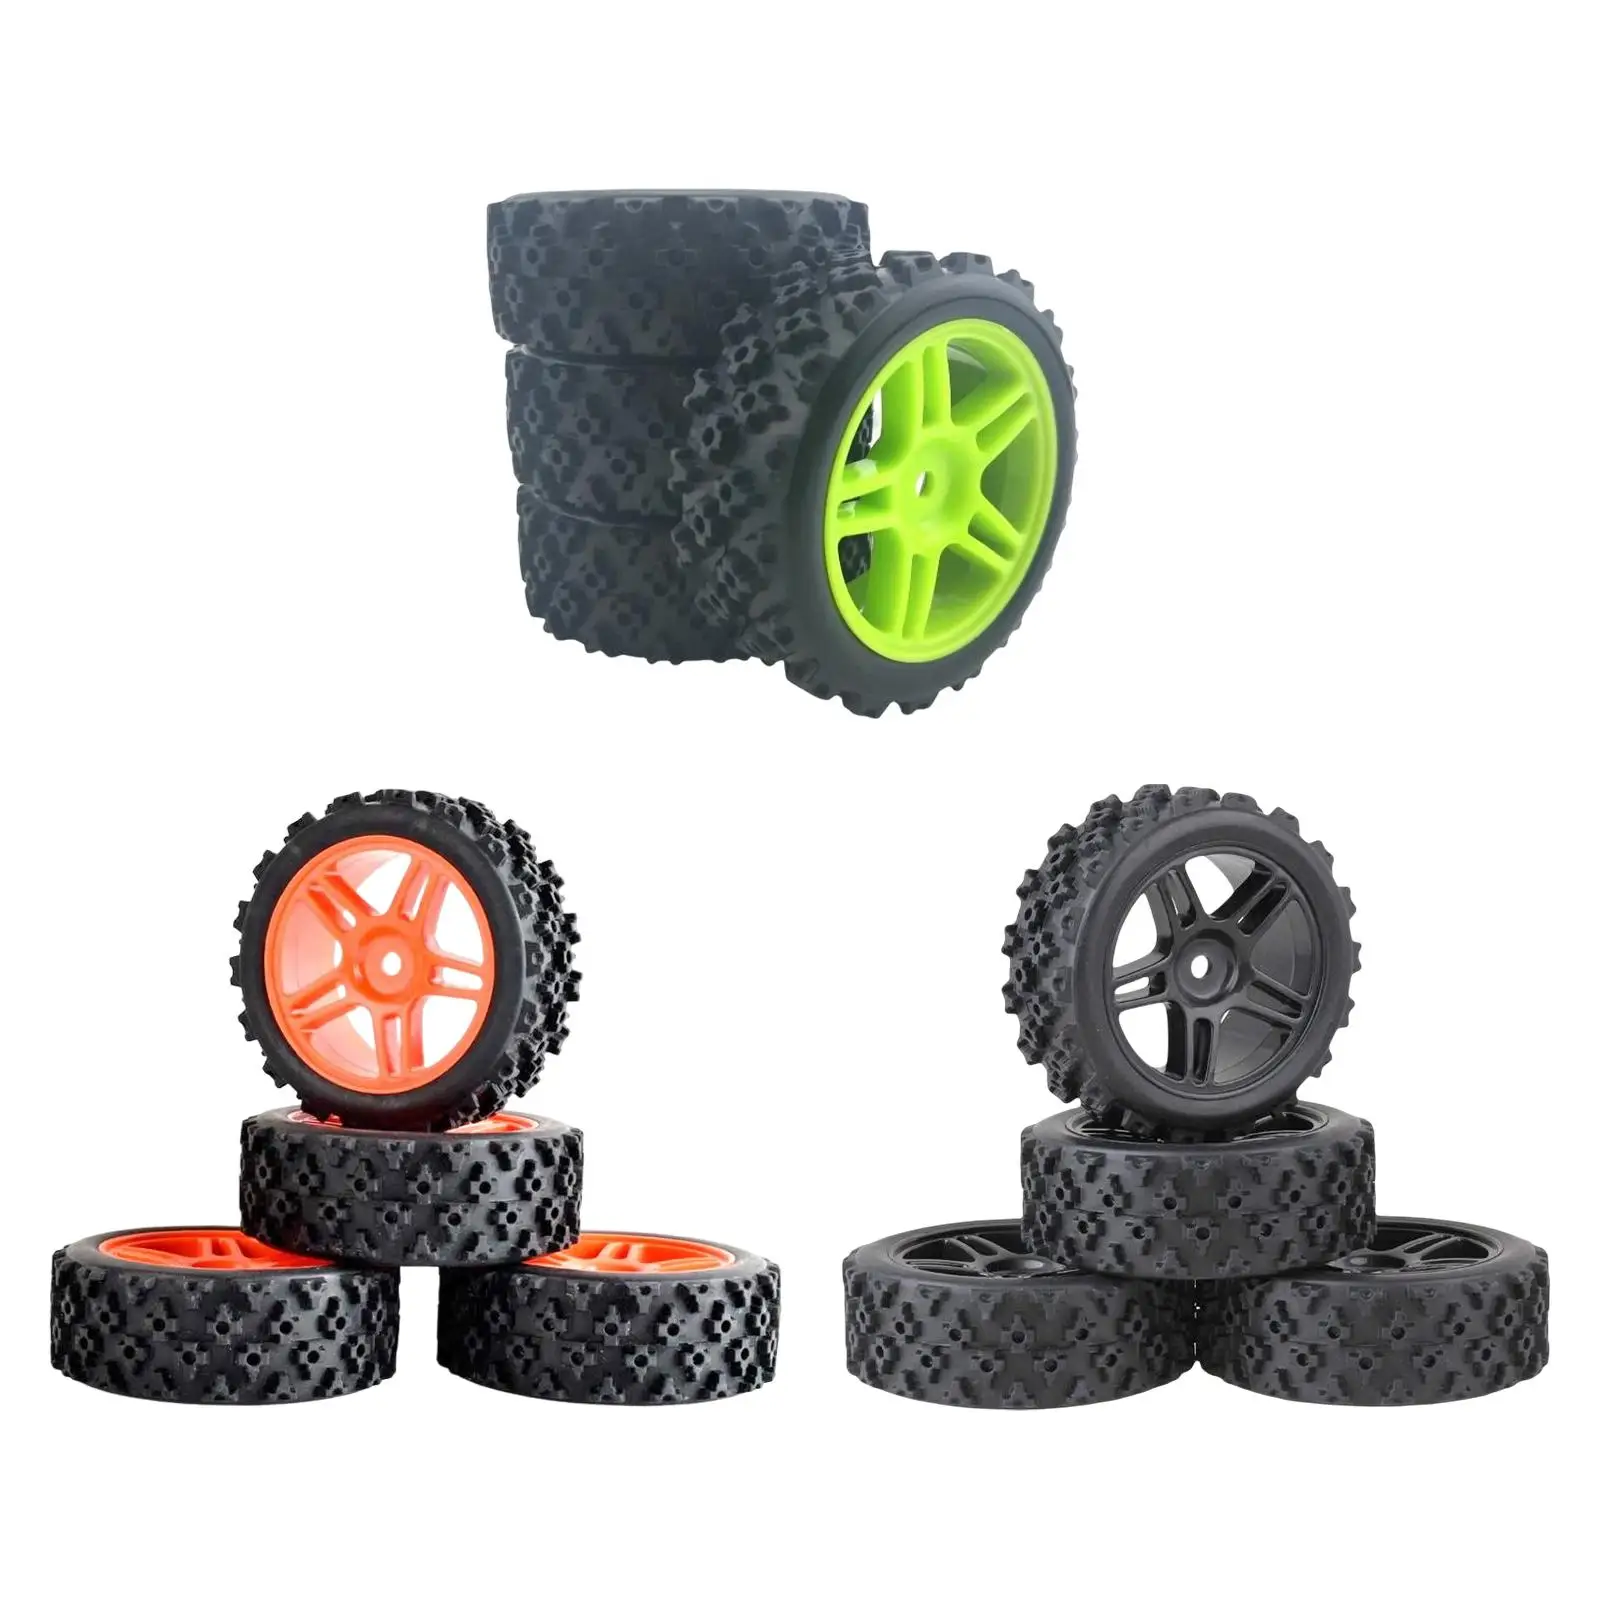 4 Pieces 12mm Hex Rubber Tires Universal Replacement Durable 71mm for Remo 1631 Buggy Toy Parts Hobby Model Vehicle